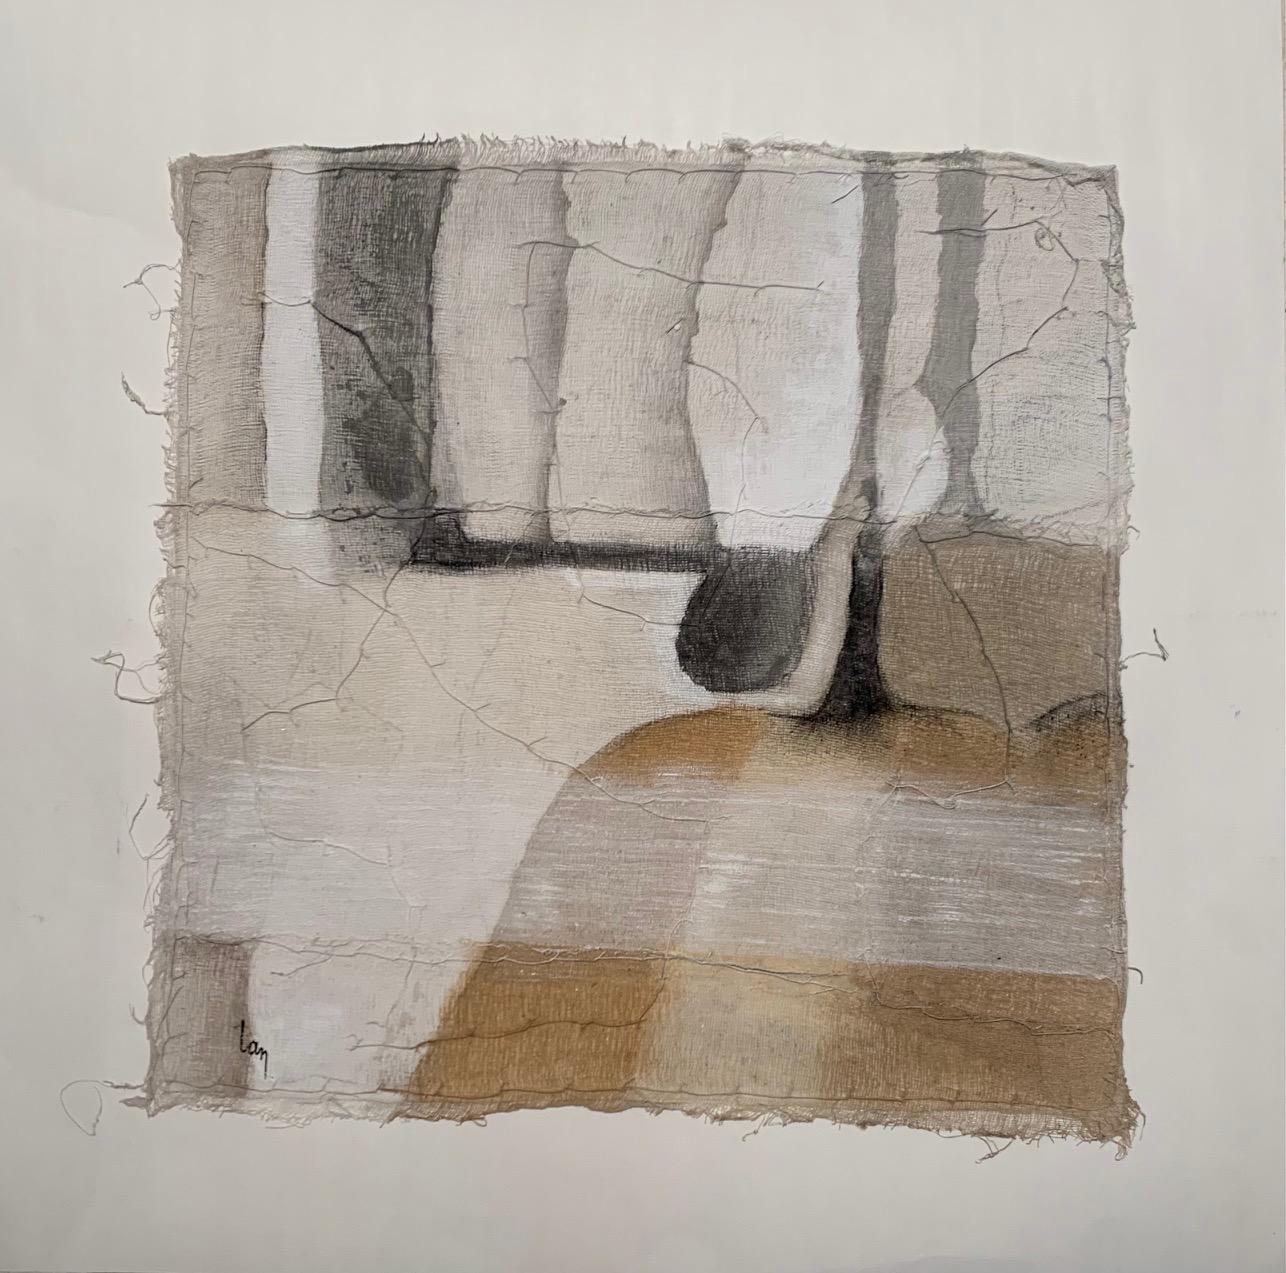 Contemporary Belgian artist Diane Petry creates her own three layer canvas using pima cotton, gauze and fine paper.
Colors are gold, beige and grey with black dot.
Raw edges and applied threads add texture and dimension to the acrylic